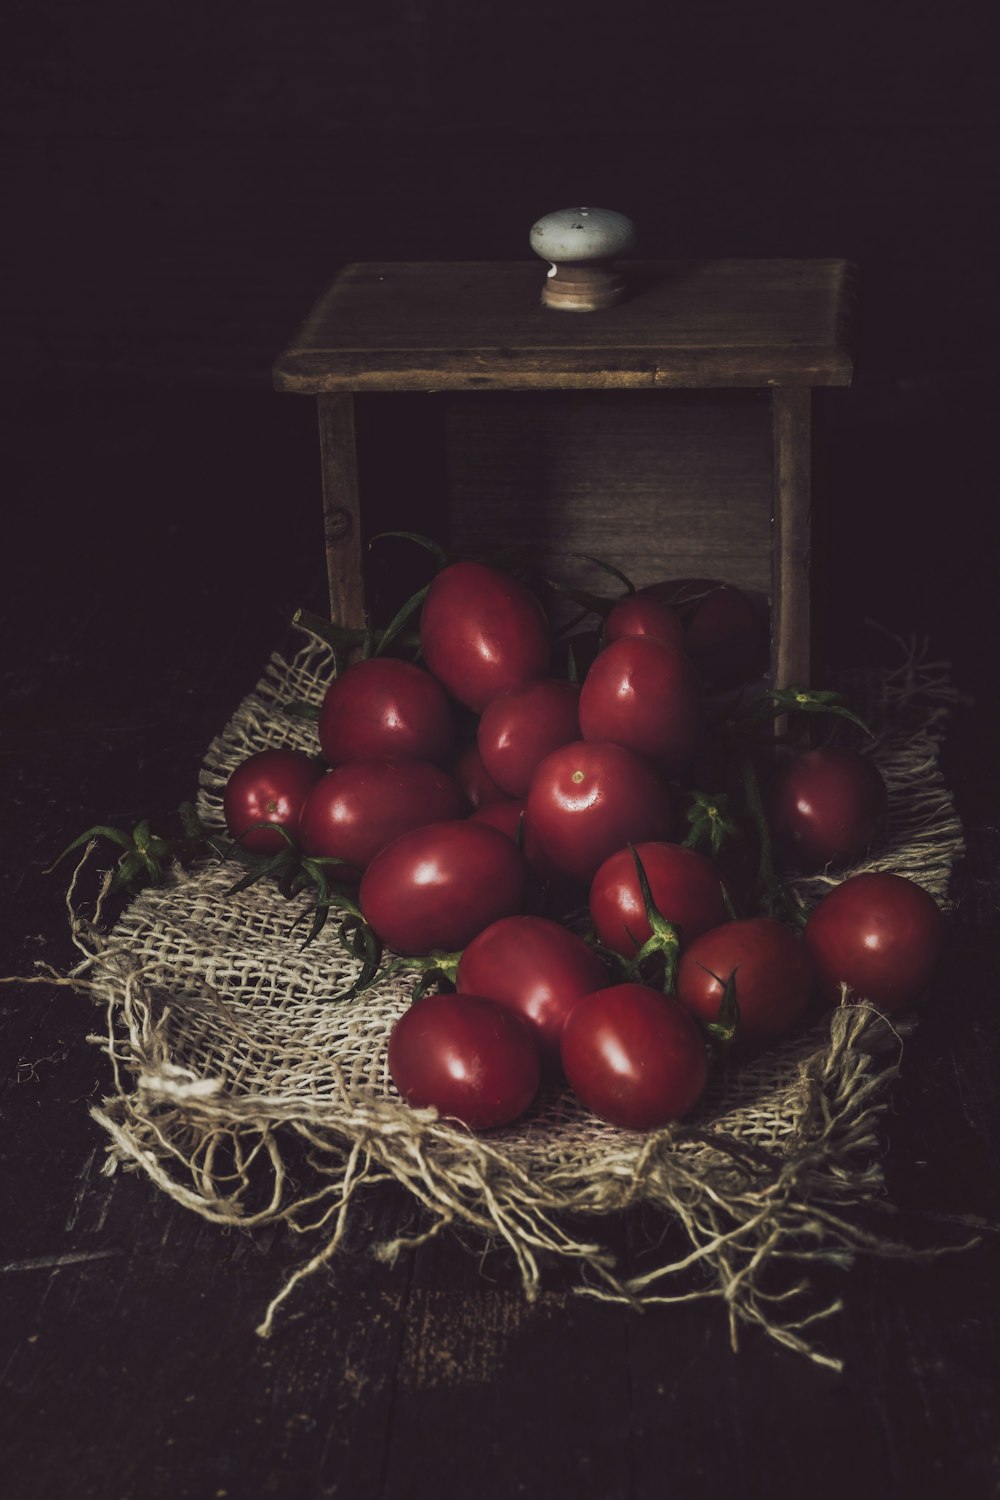 red round fruits on brown woven basket